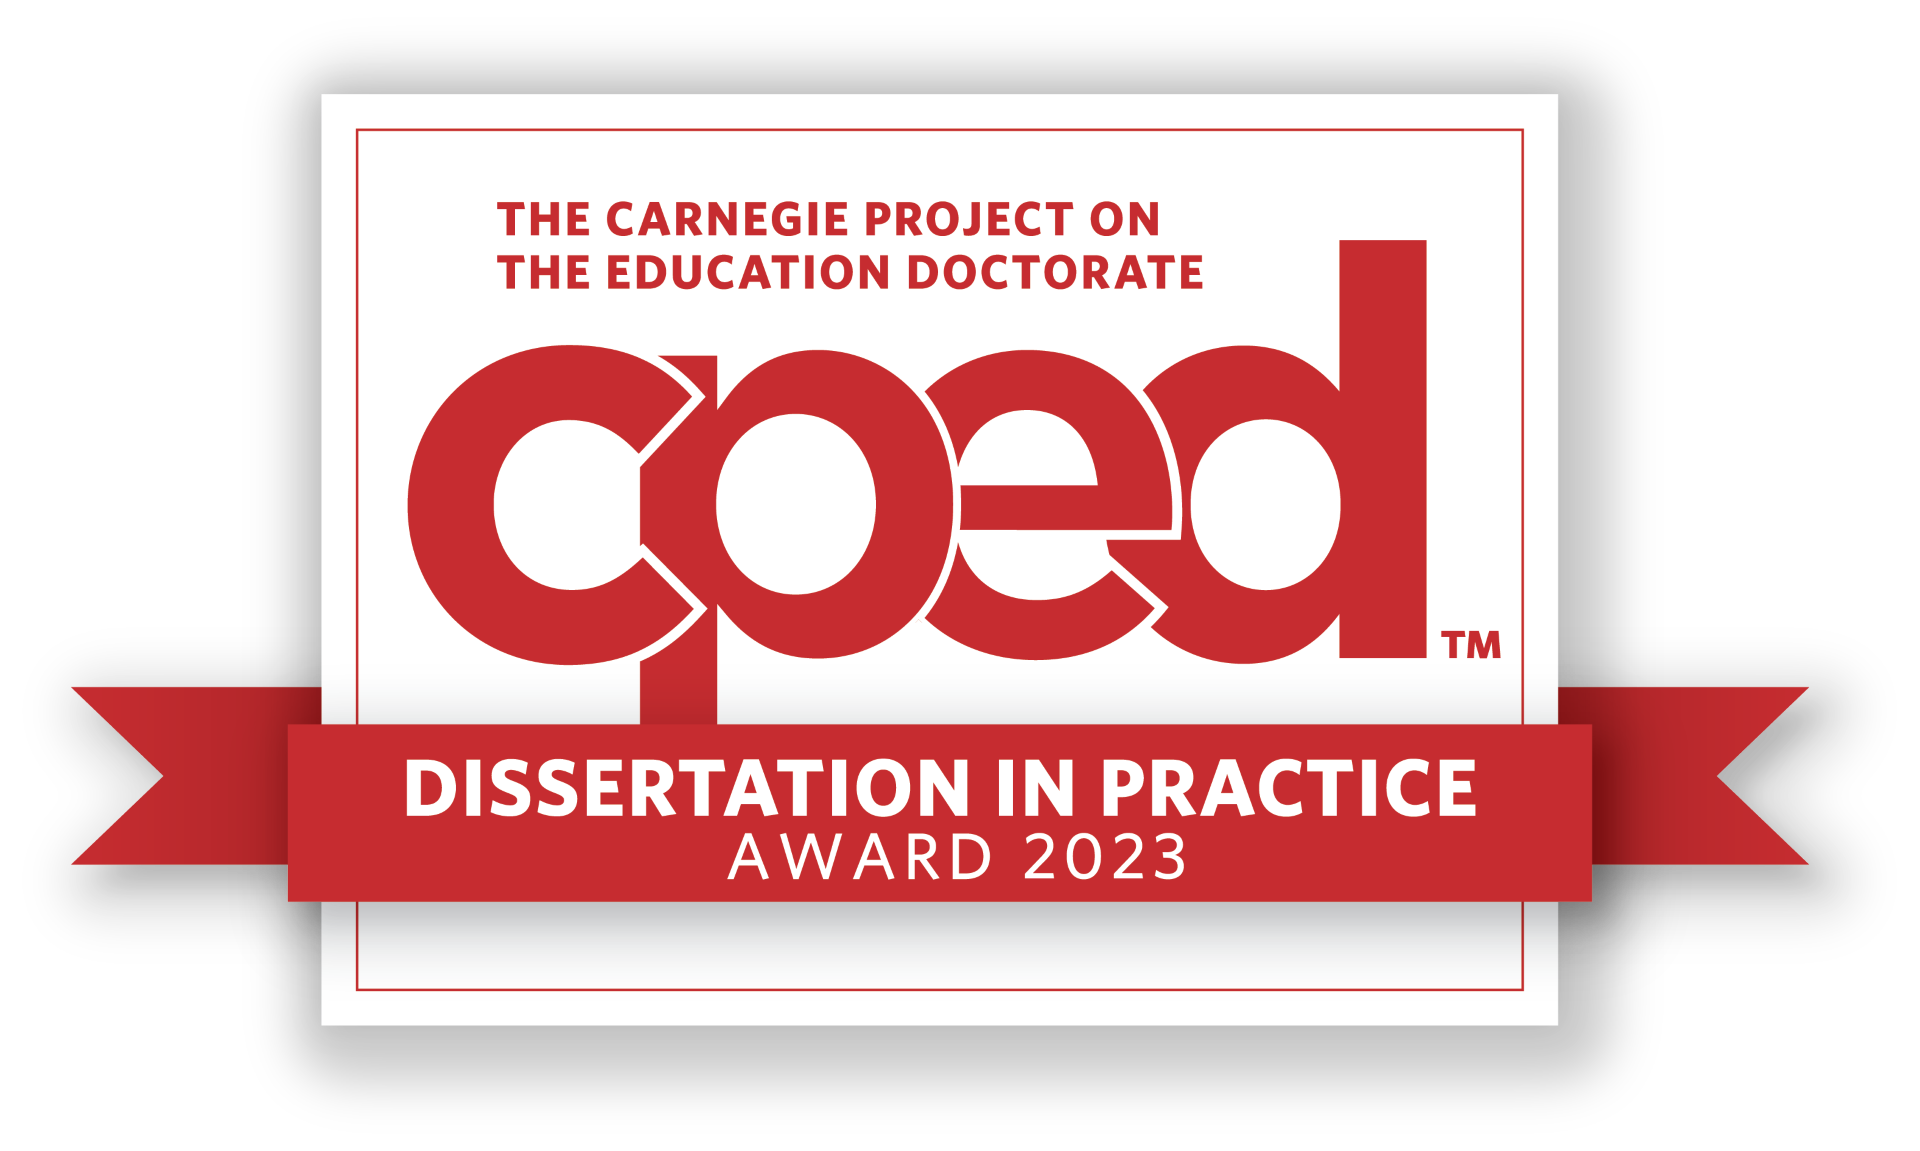 CPED Dissertation in practice award of the year 2023 logo